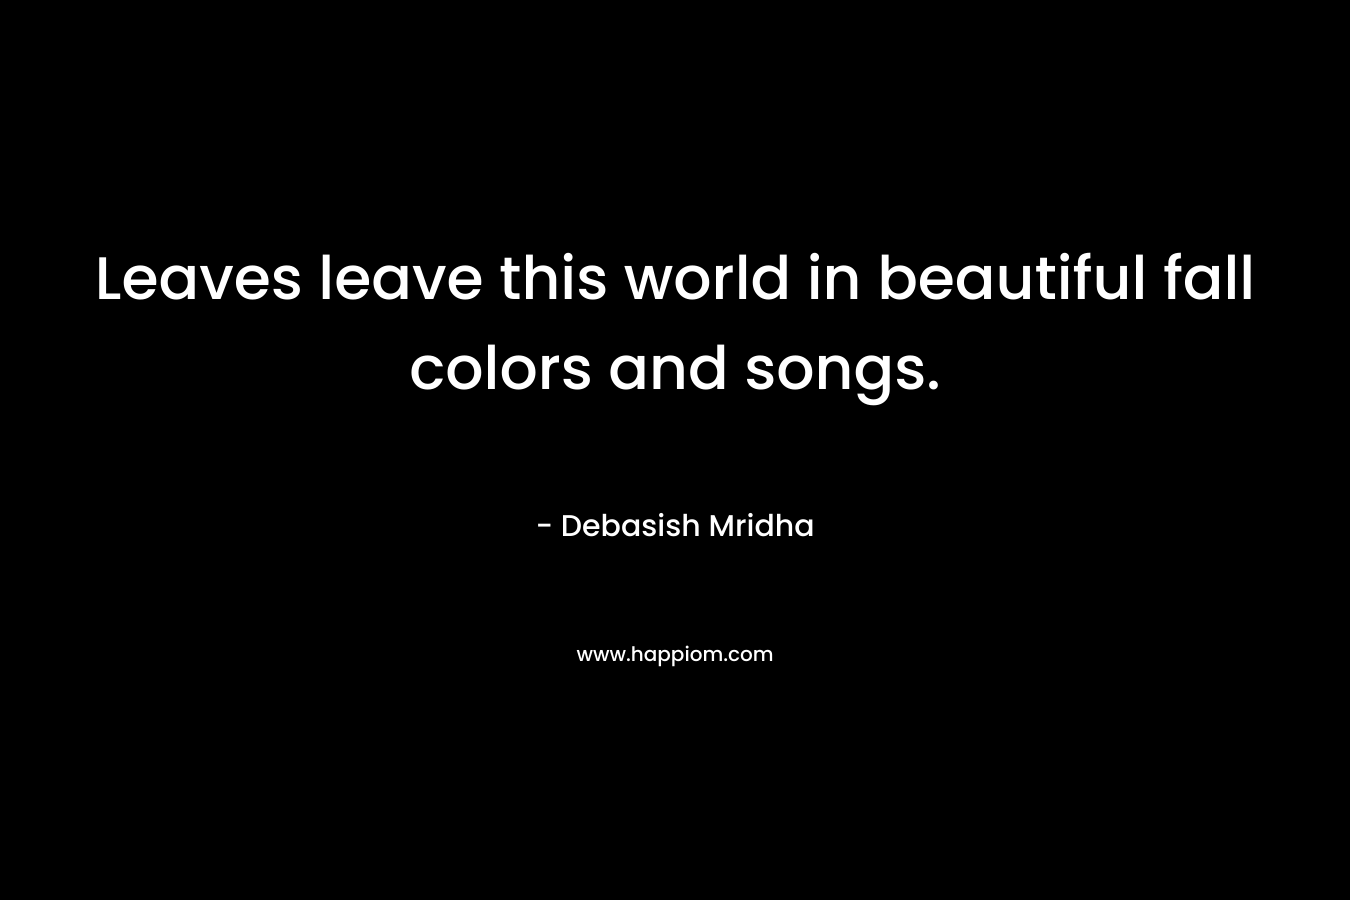 Leaves leave this world in beautiful fall colors and songs. – Debasish Mridha